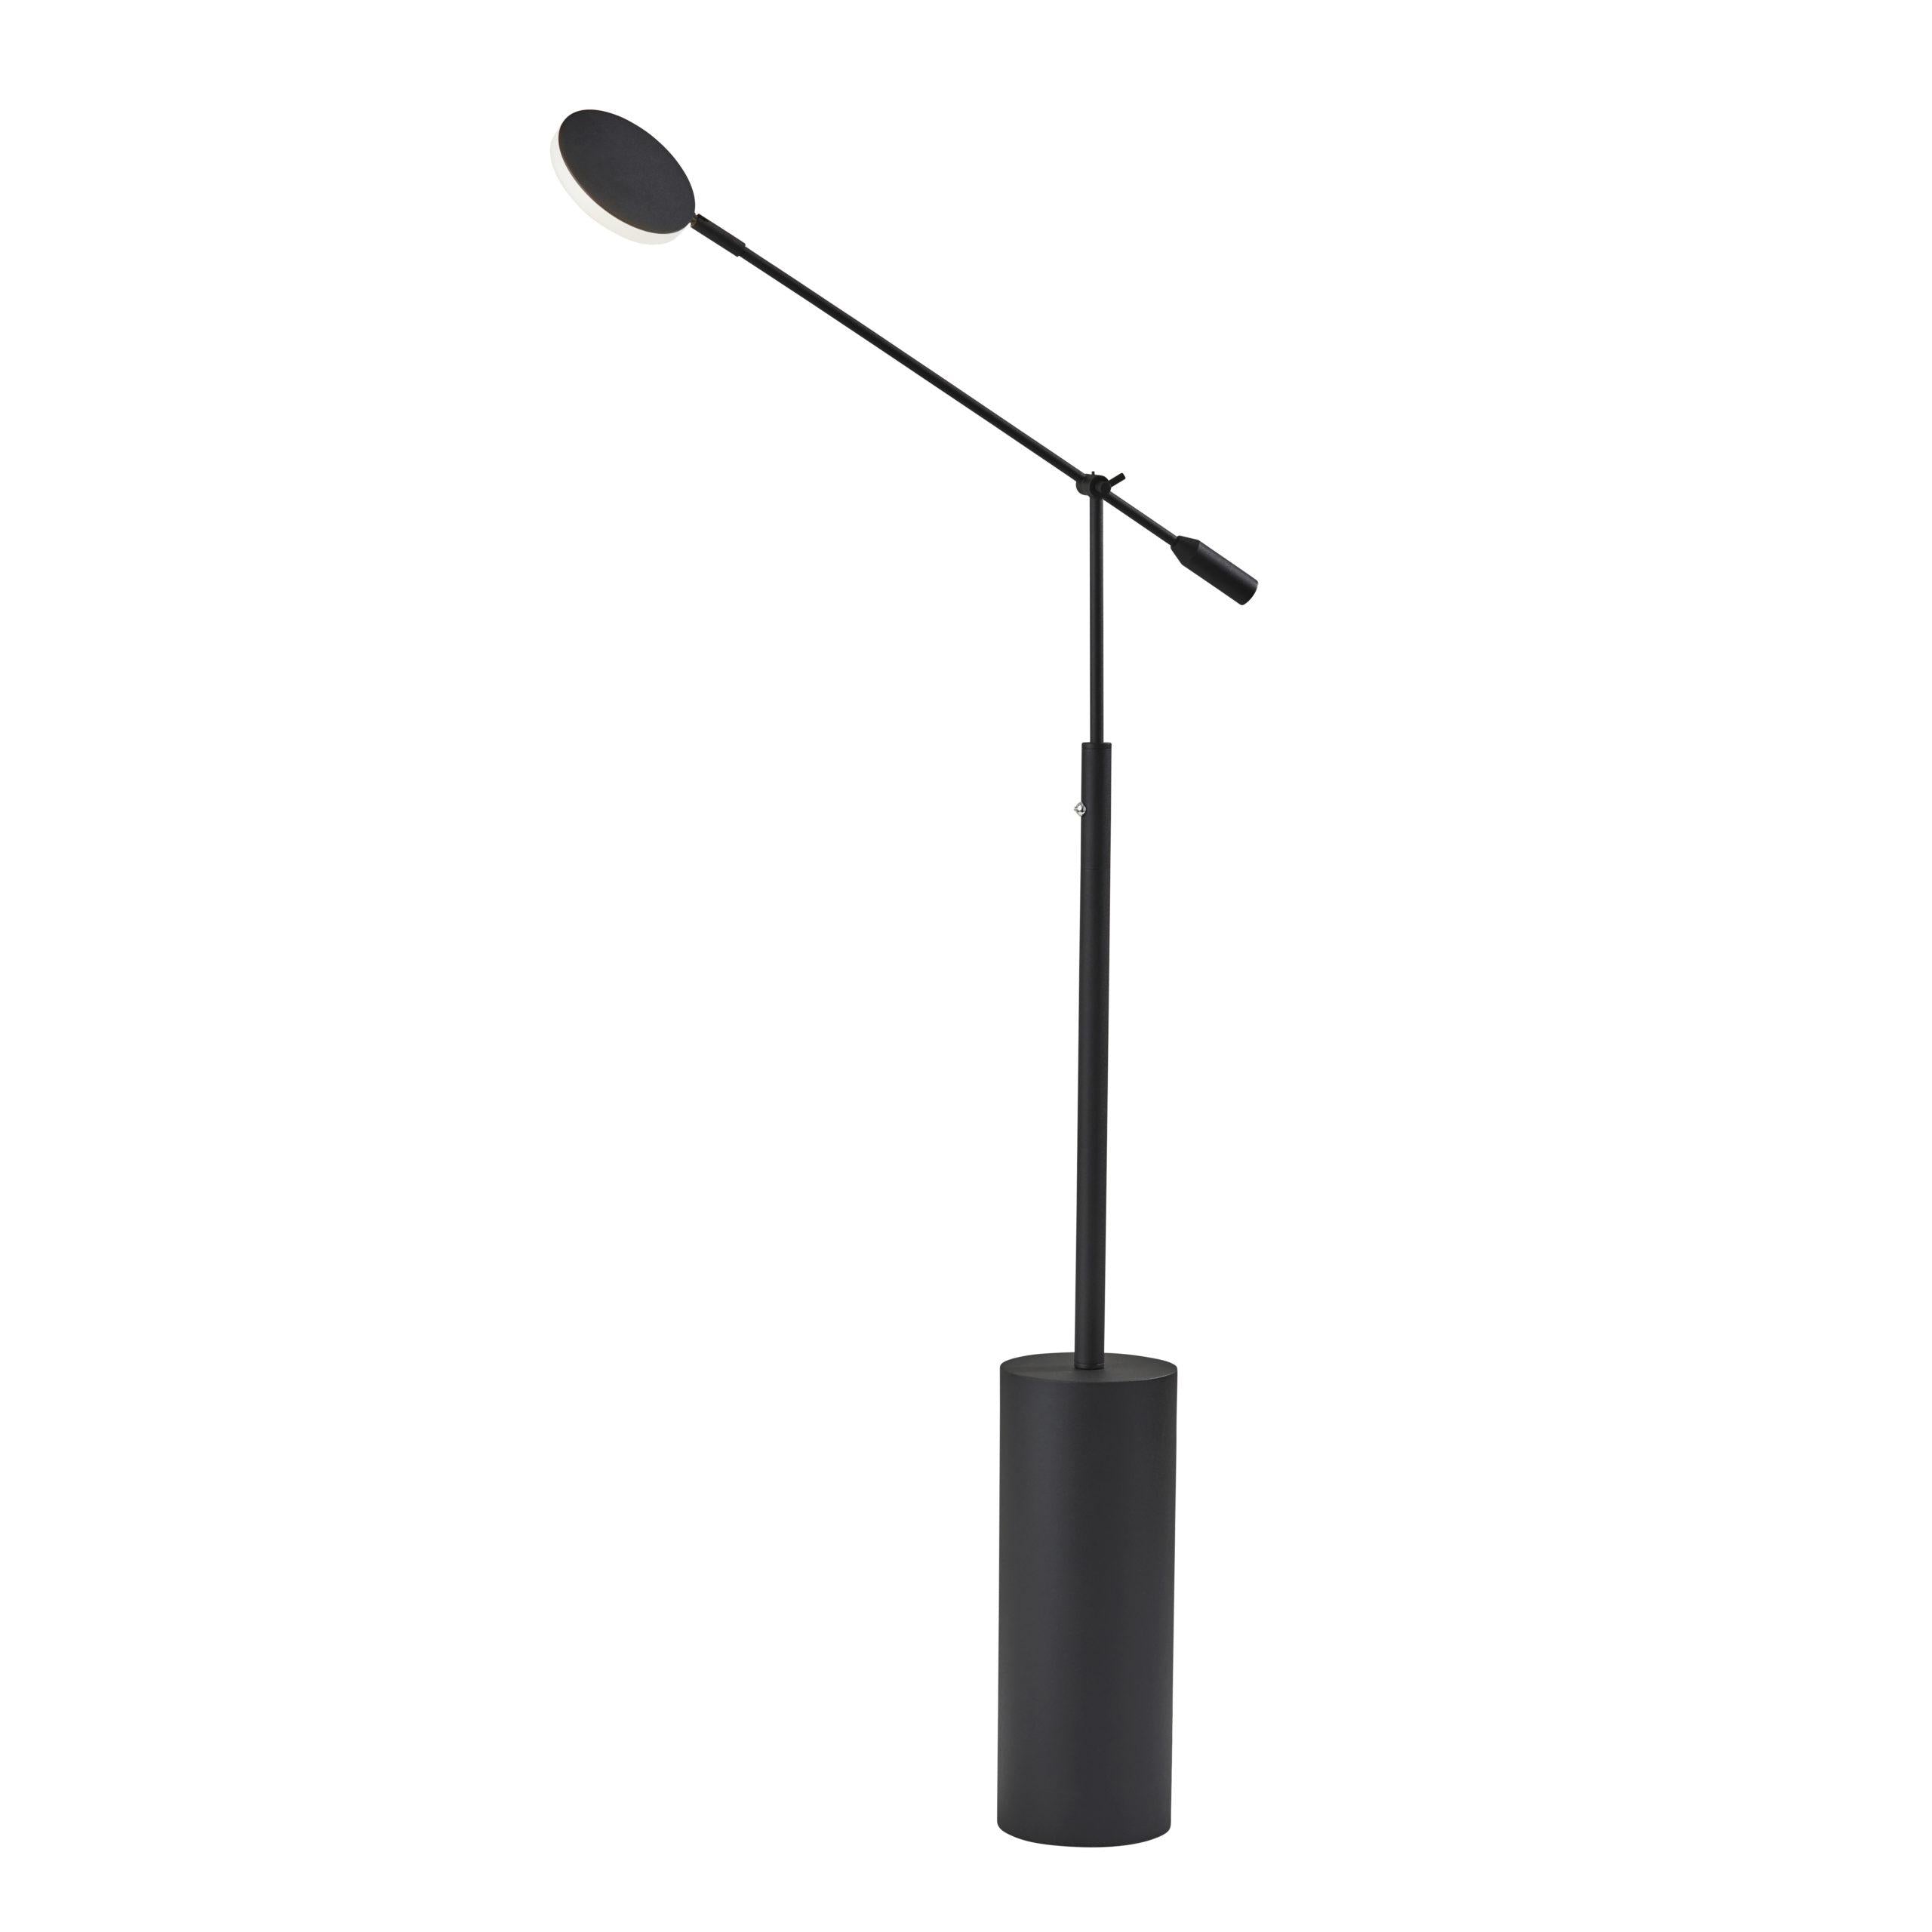 GROVER Floor lamp Black INTEGRATED LED - 2151-01 | ADESSO